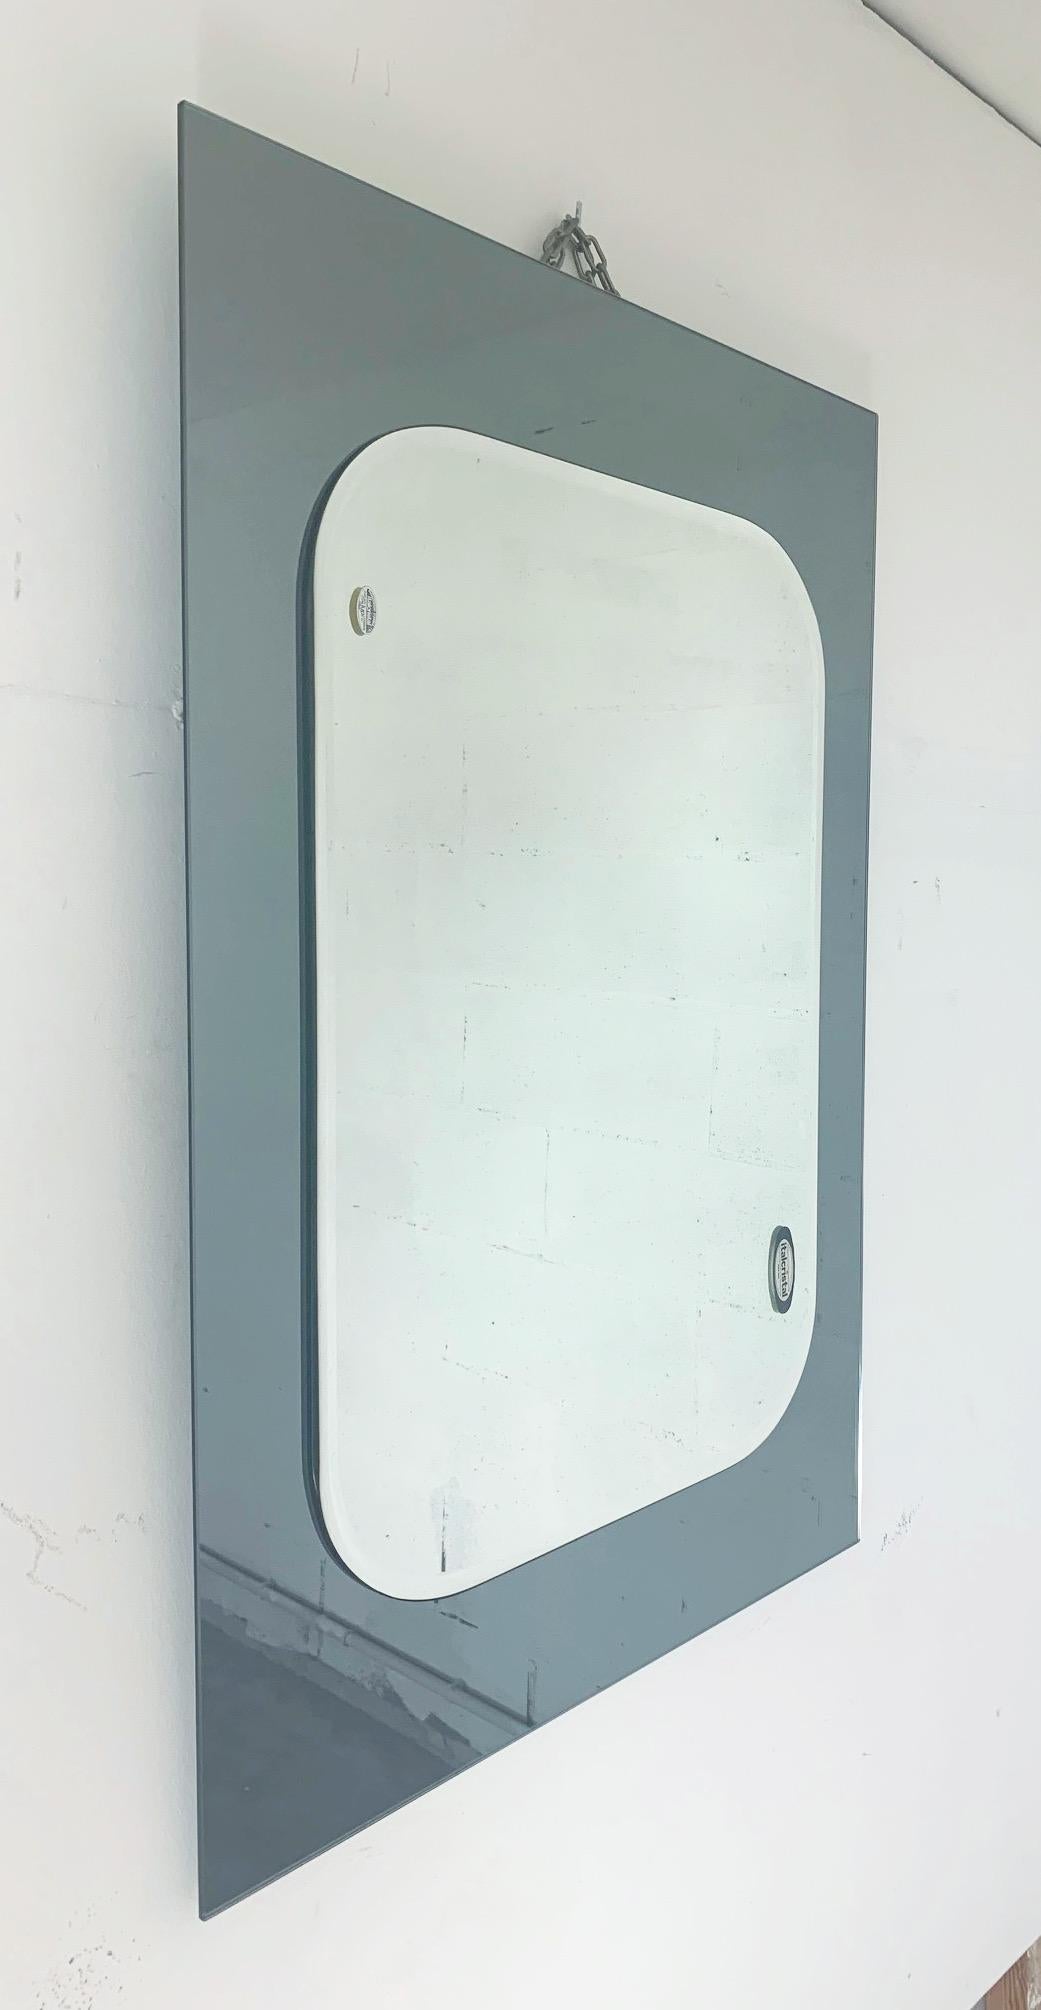 Vintage Italian rectangular mirror with beveled glass in light blue color / made in Italy by Italcristal, circa 1960s
Original label on the mirror
Measures: Height 38 inches, width 26 inches, mirror height 28.5 inches, mirror width 20 inches
1 in